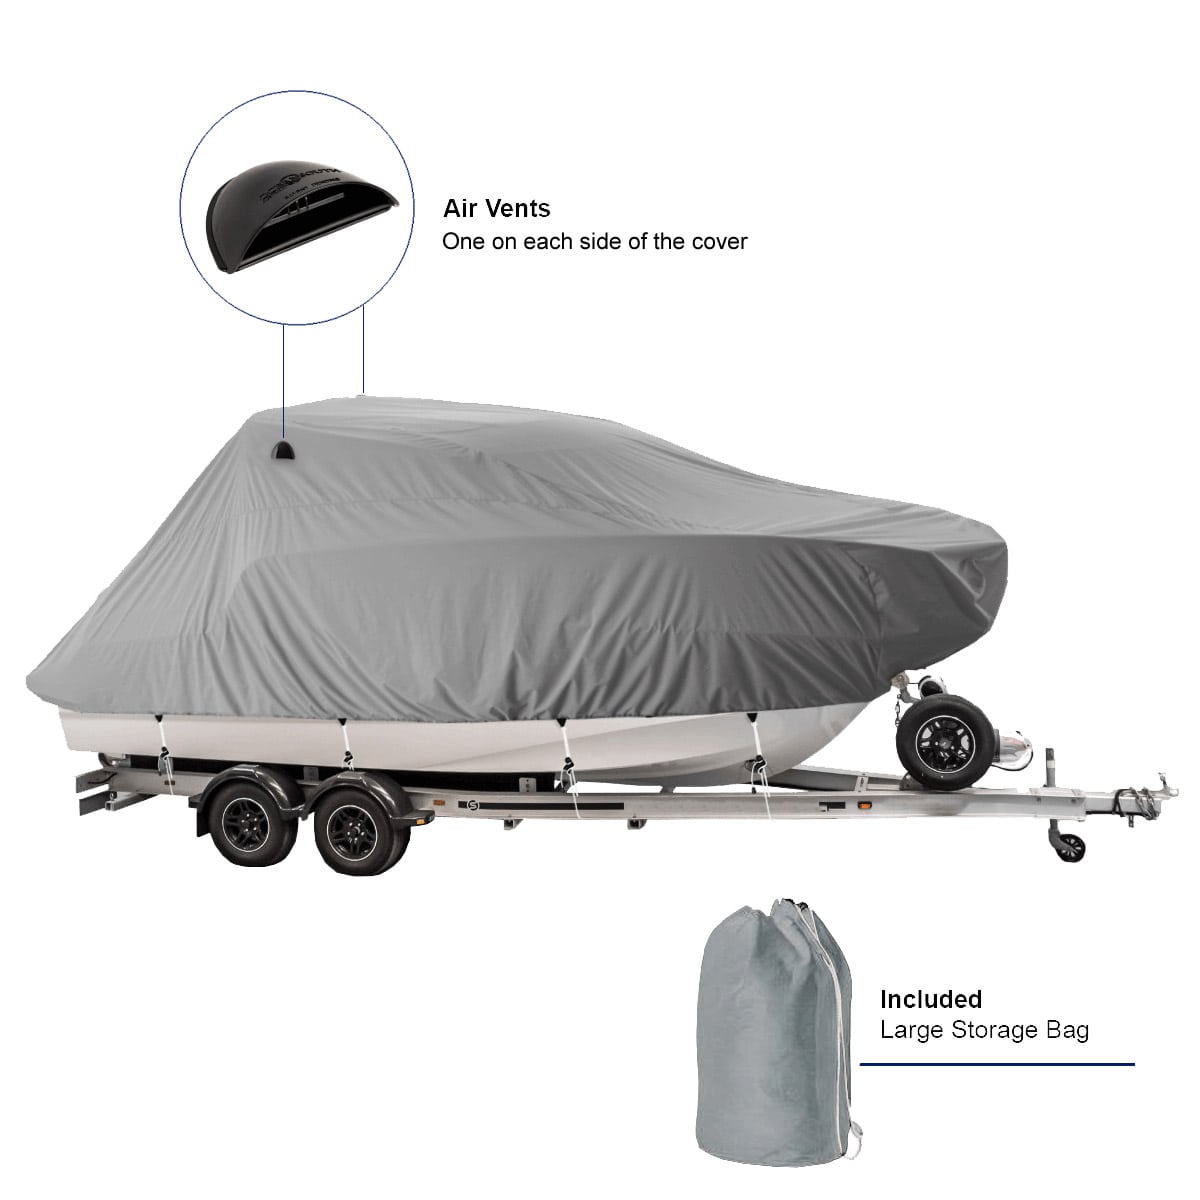 Pilothouse / Cabin Cruiser Style Cover Features